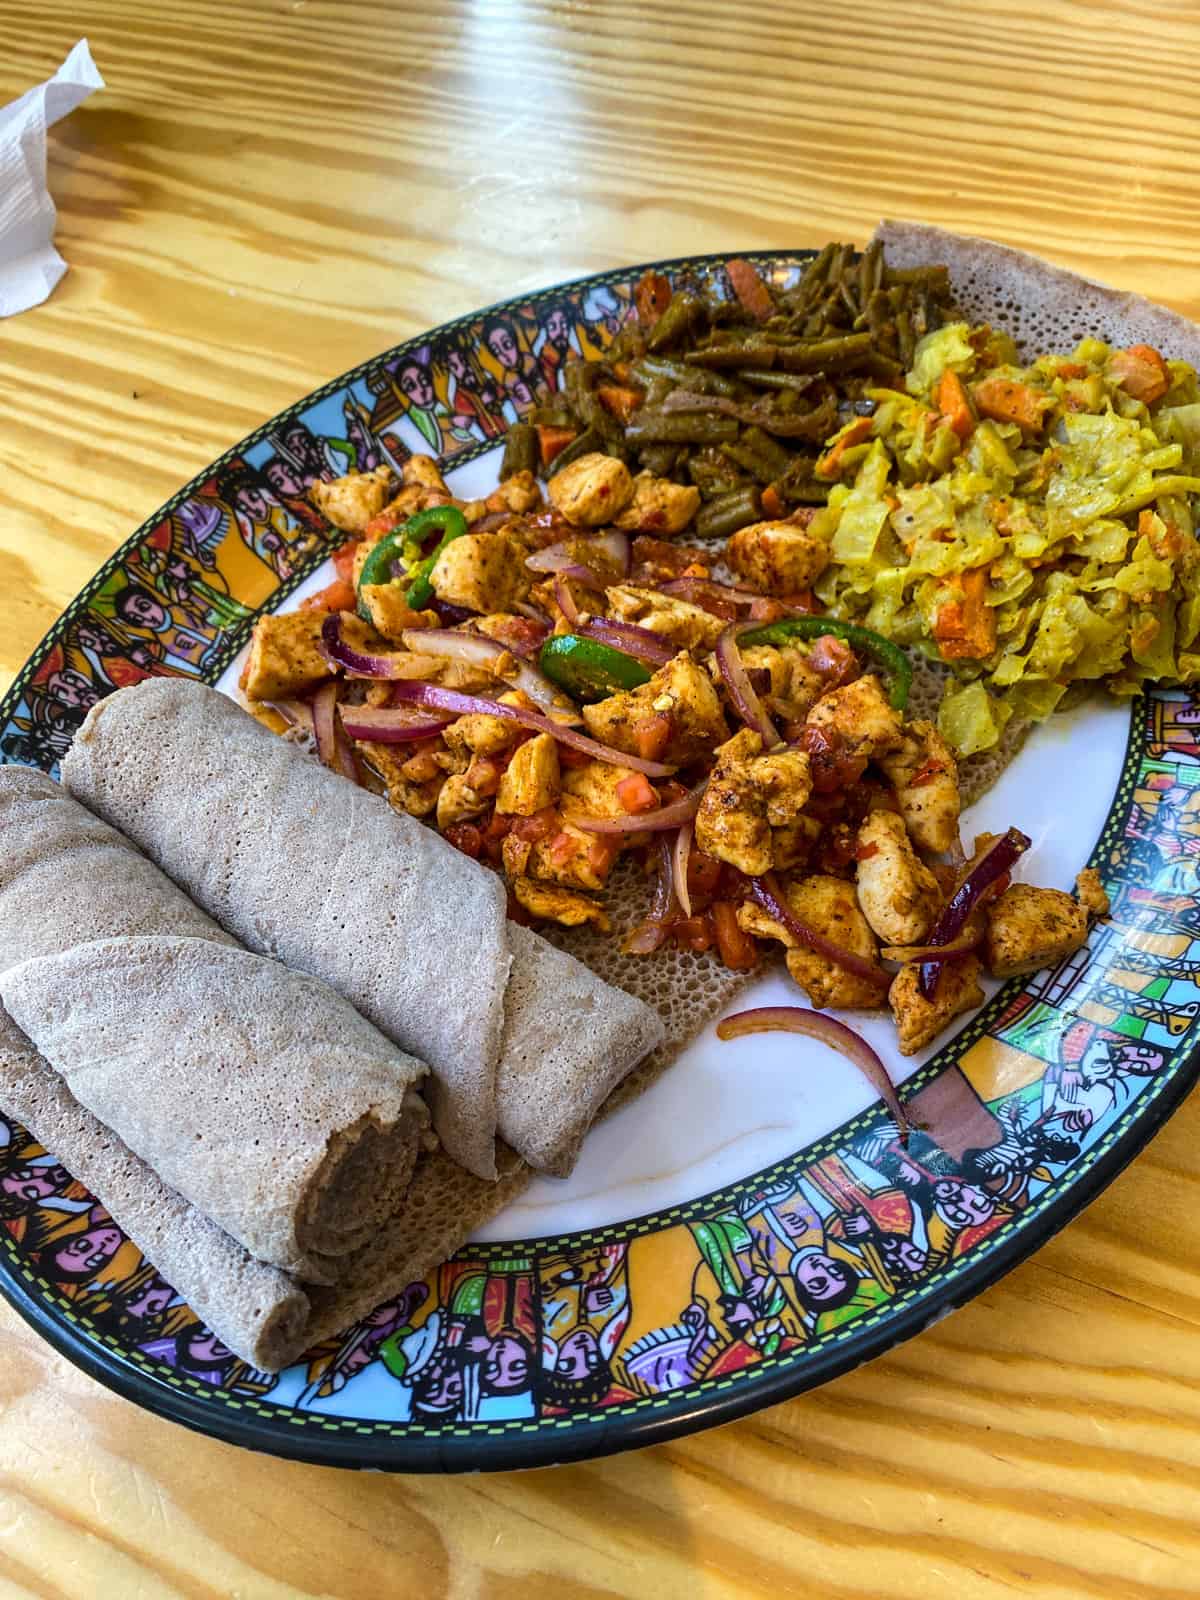 Ethiopian Food on a Bright and colorful plate